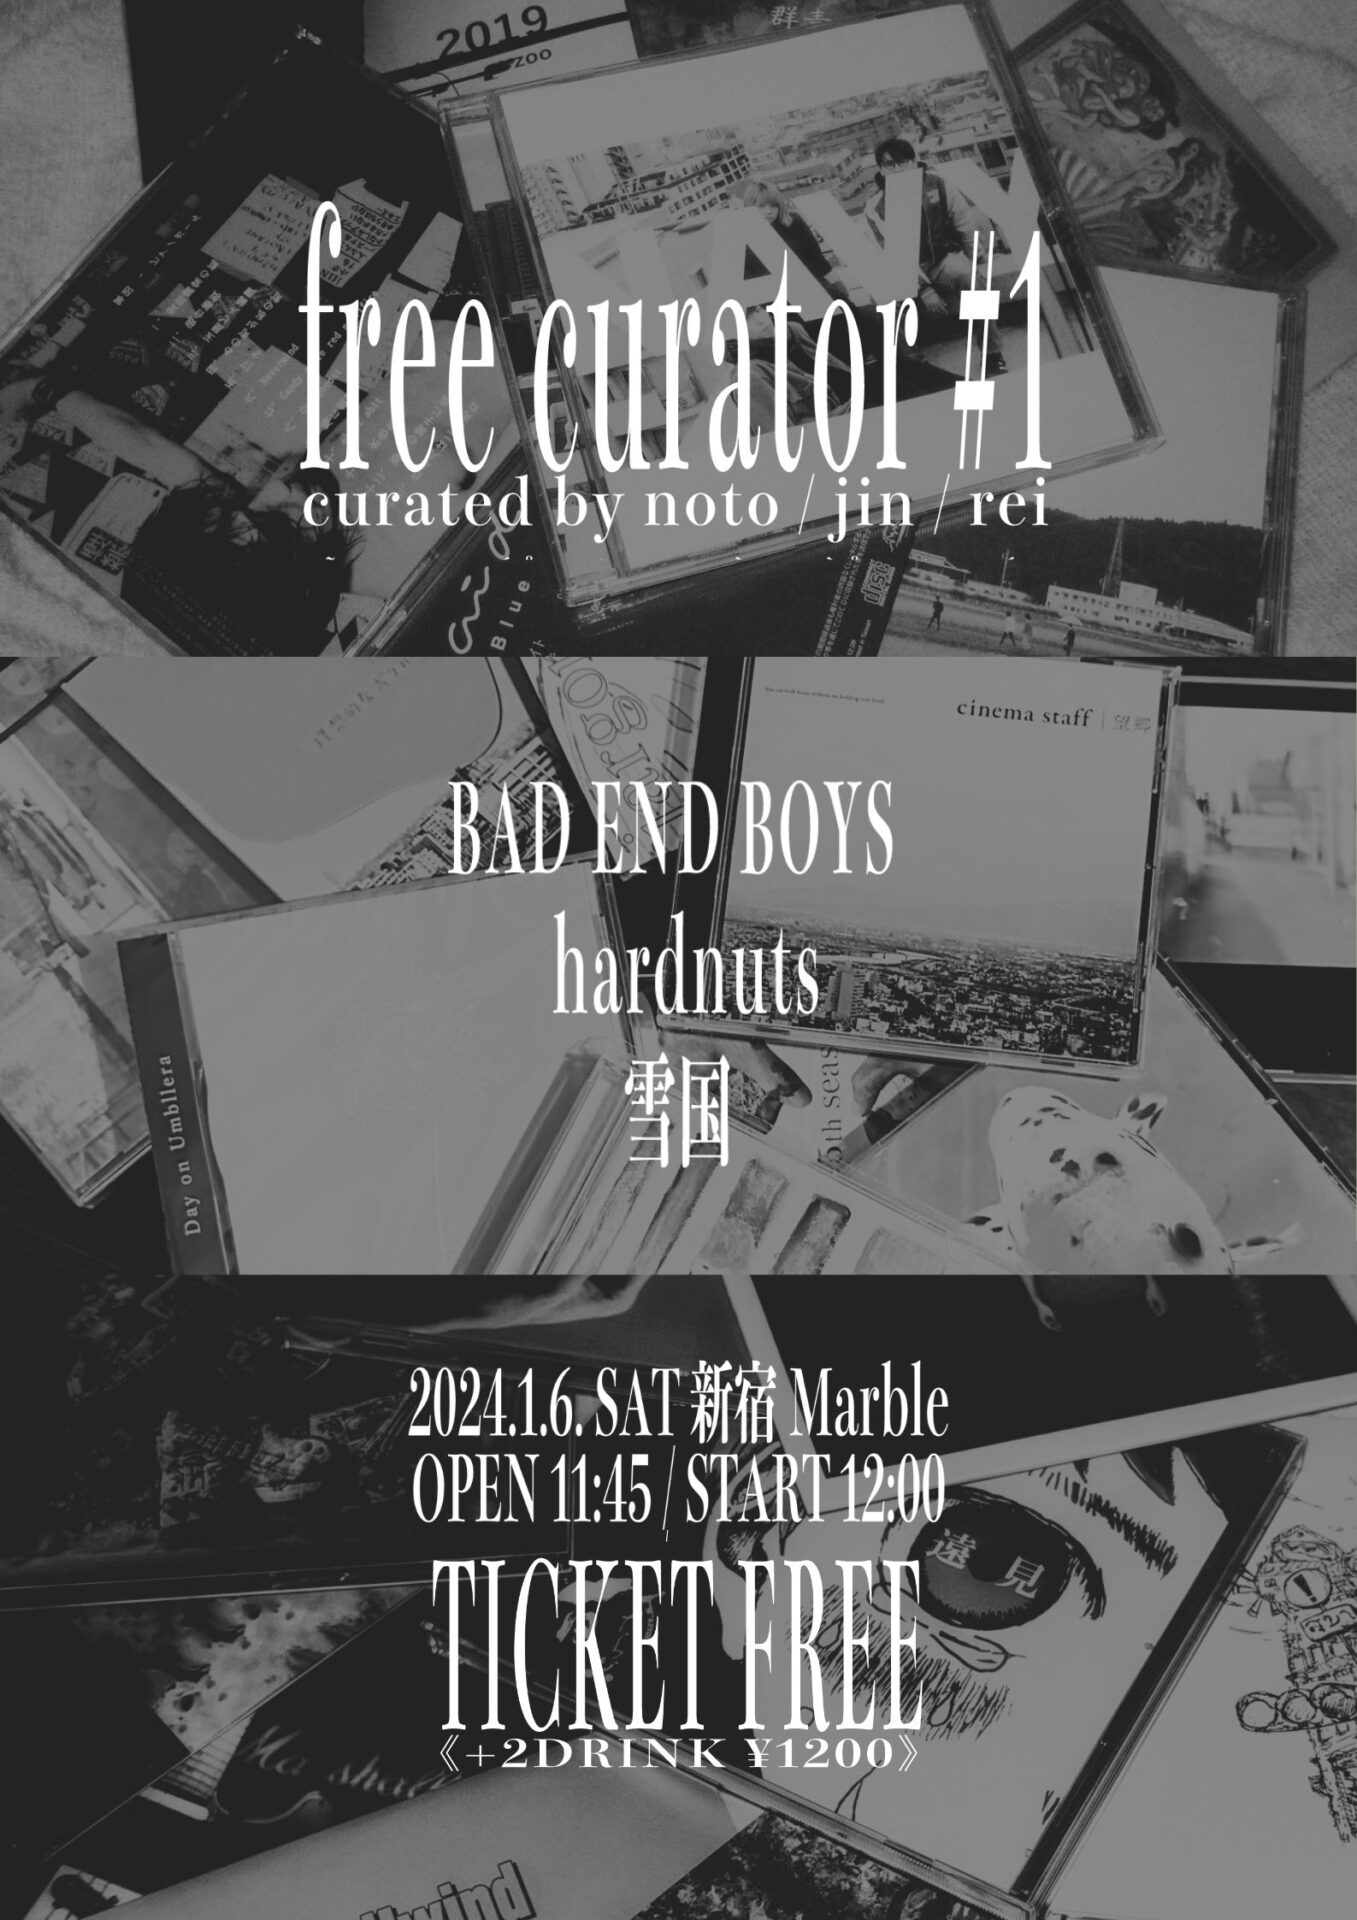 Marble presents「free curators ＃1」curated by noto / jin / rei